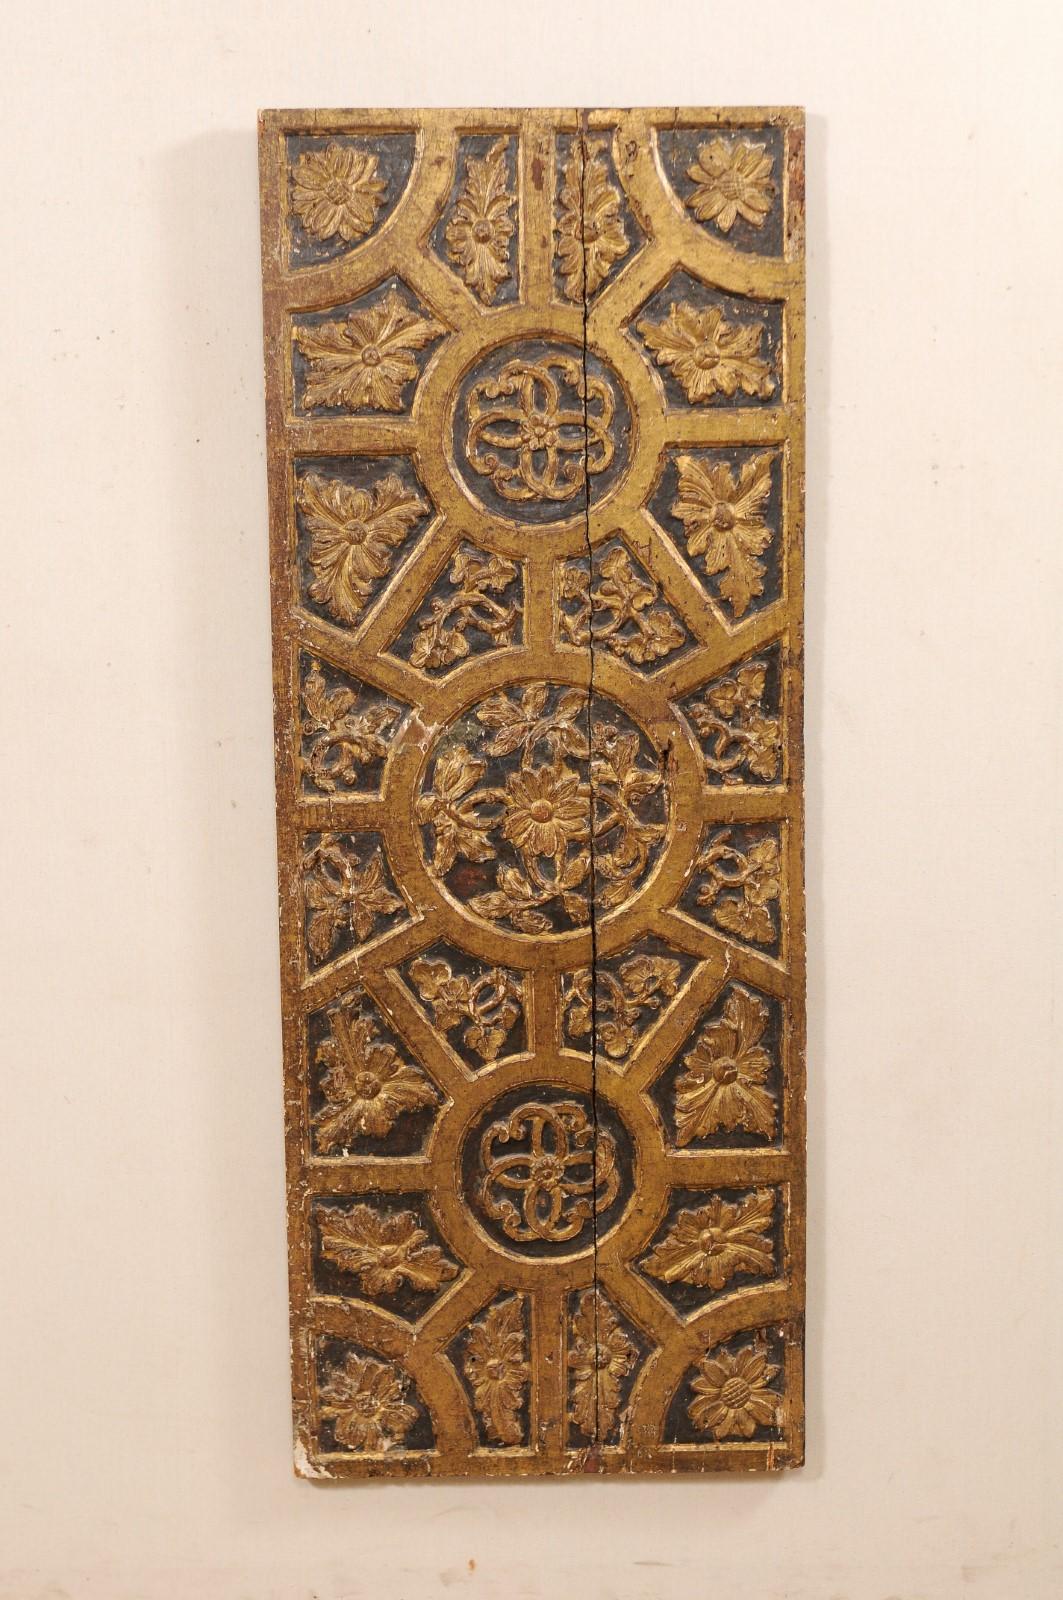 An Italian 18th century gilded and carved wood wall panel. This large size antique hand carved wood panel from Italy features a décor of rinceaux, with floral motif within various geometric panels. This piece is has gilt accents which highlight the